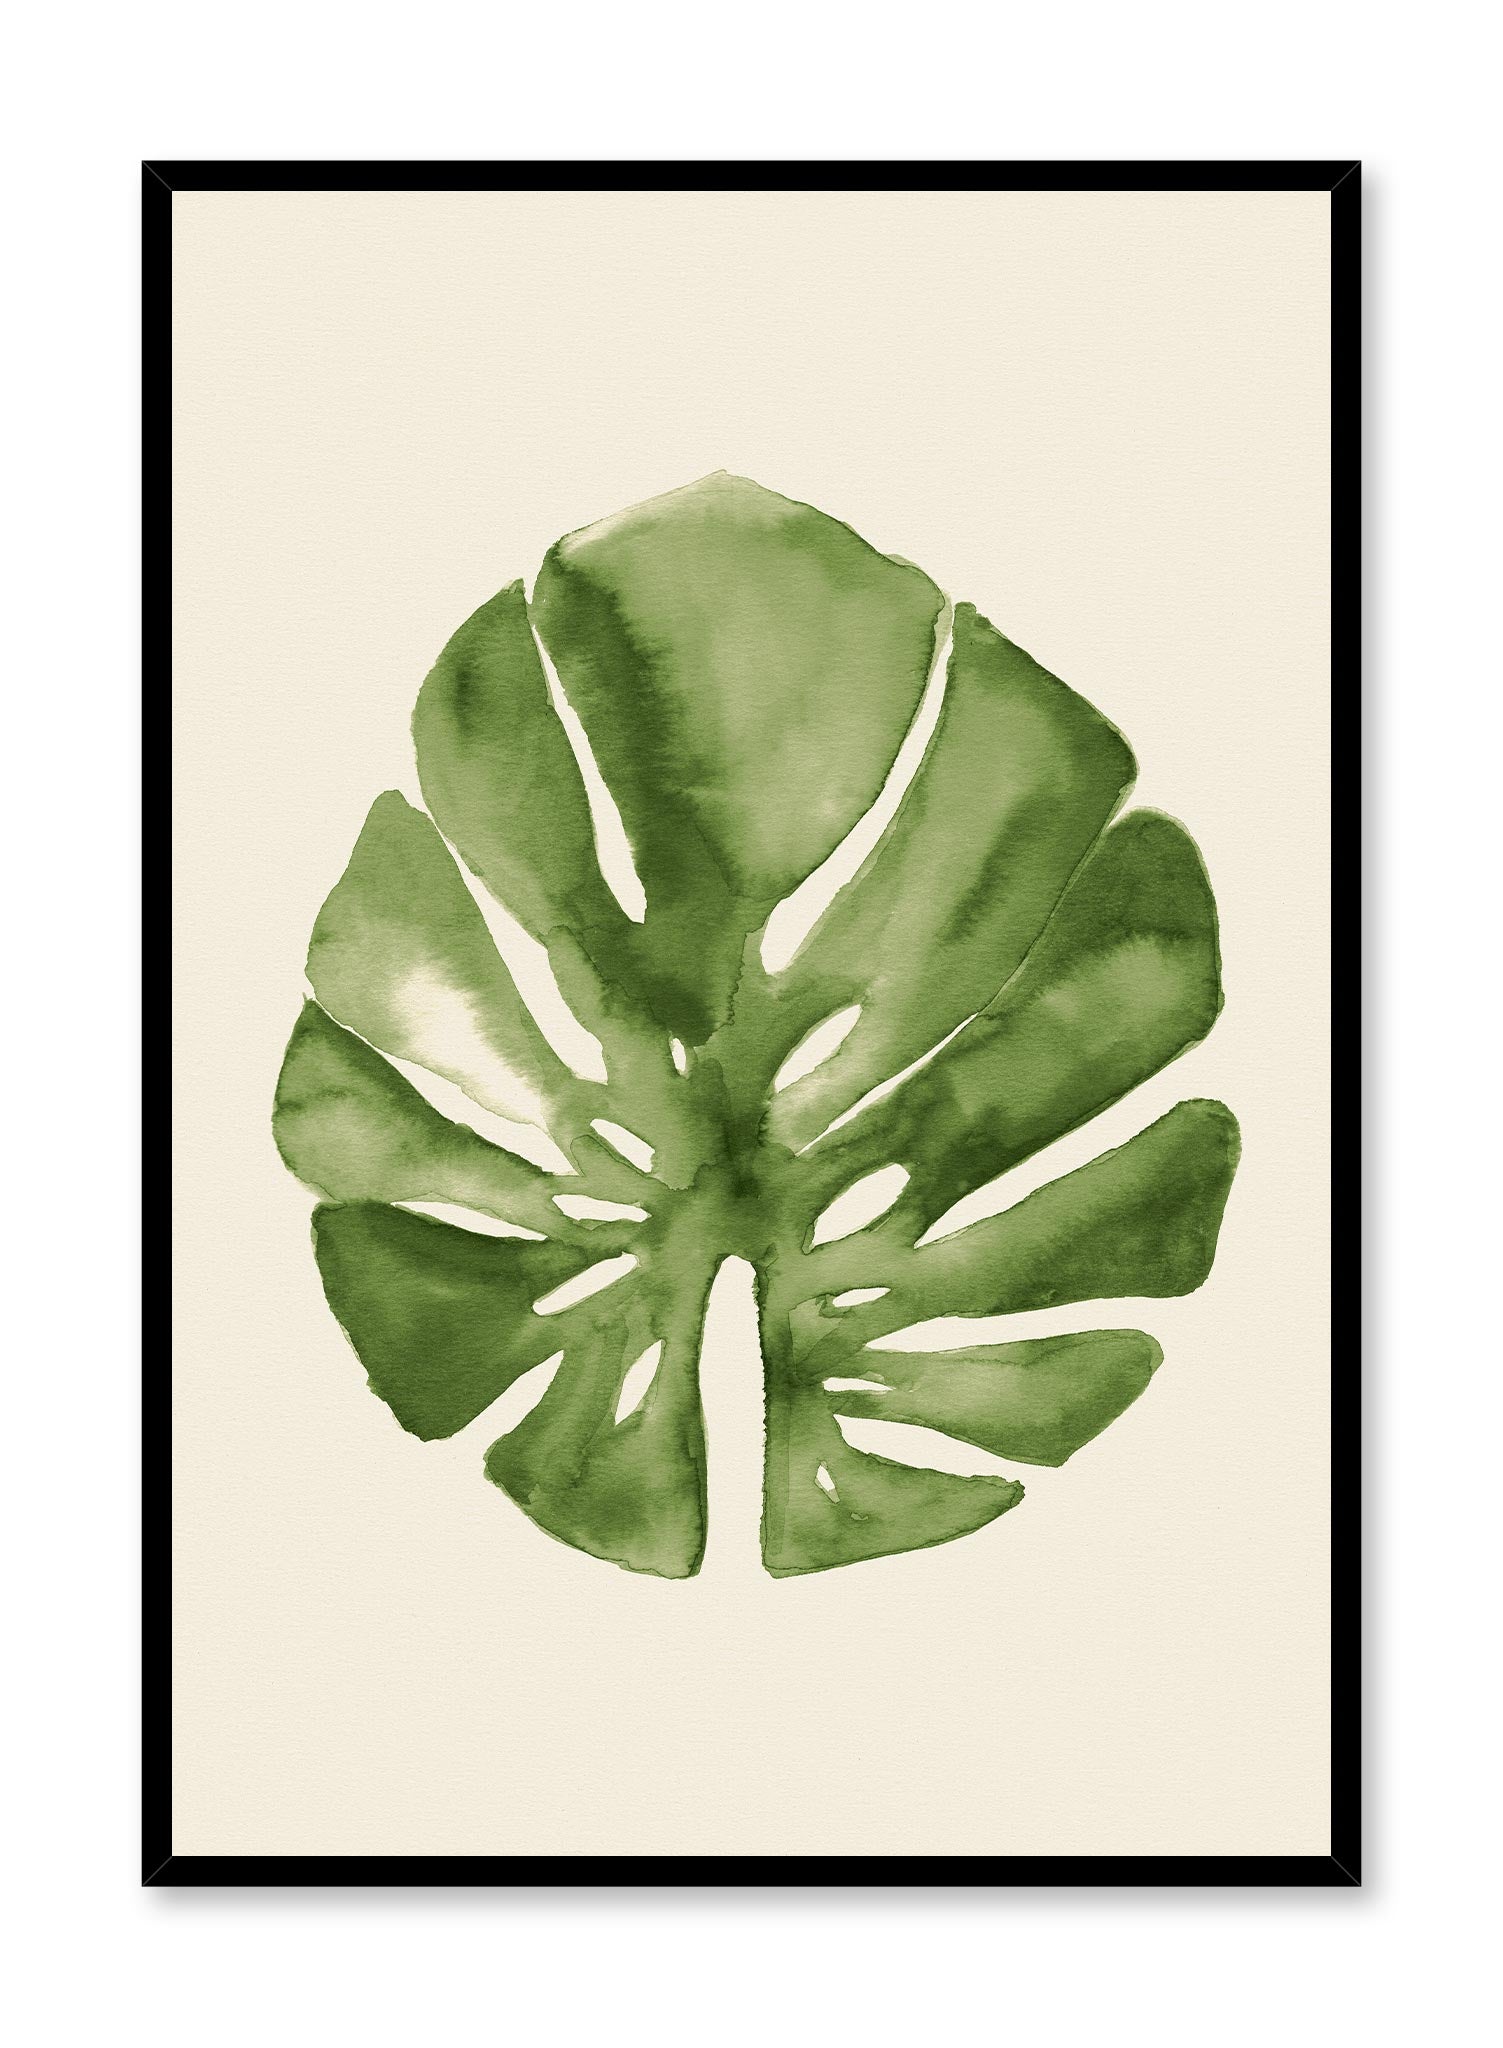 Ink Monstera is a minimalist illustration of a single giant green monstera leaf by Opposite Wall.